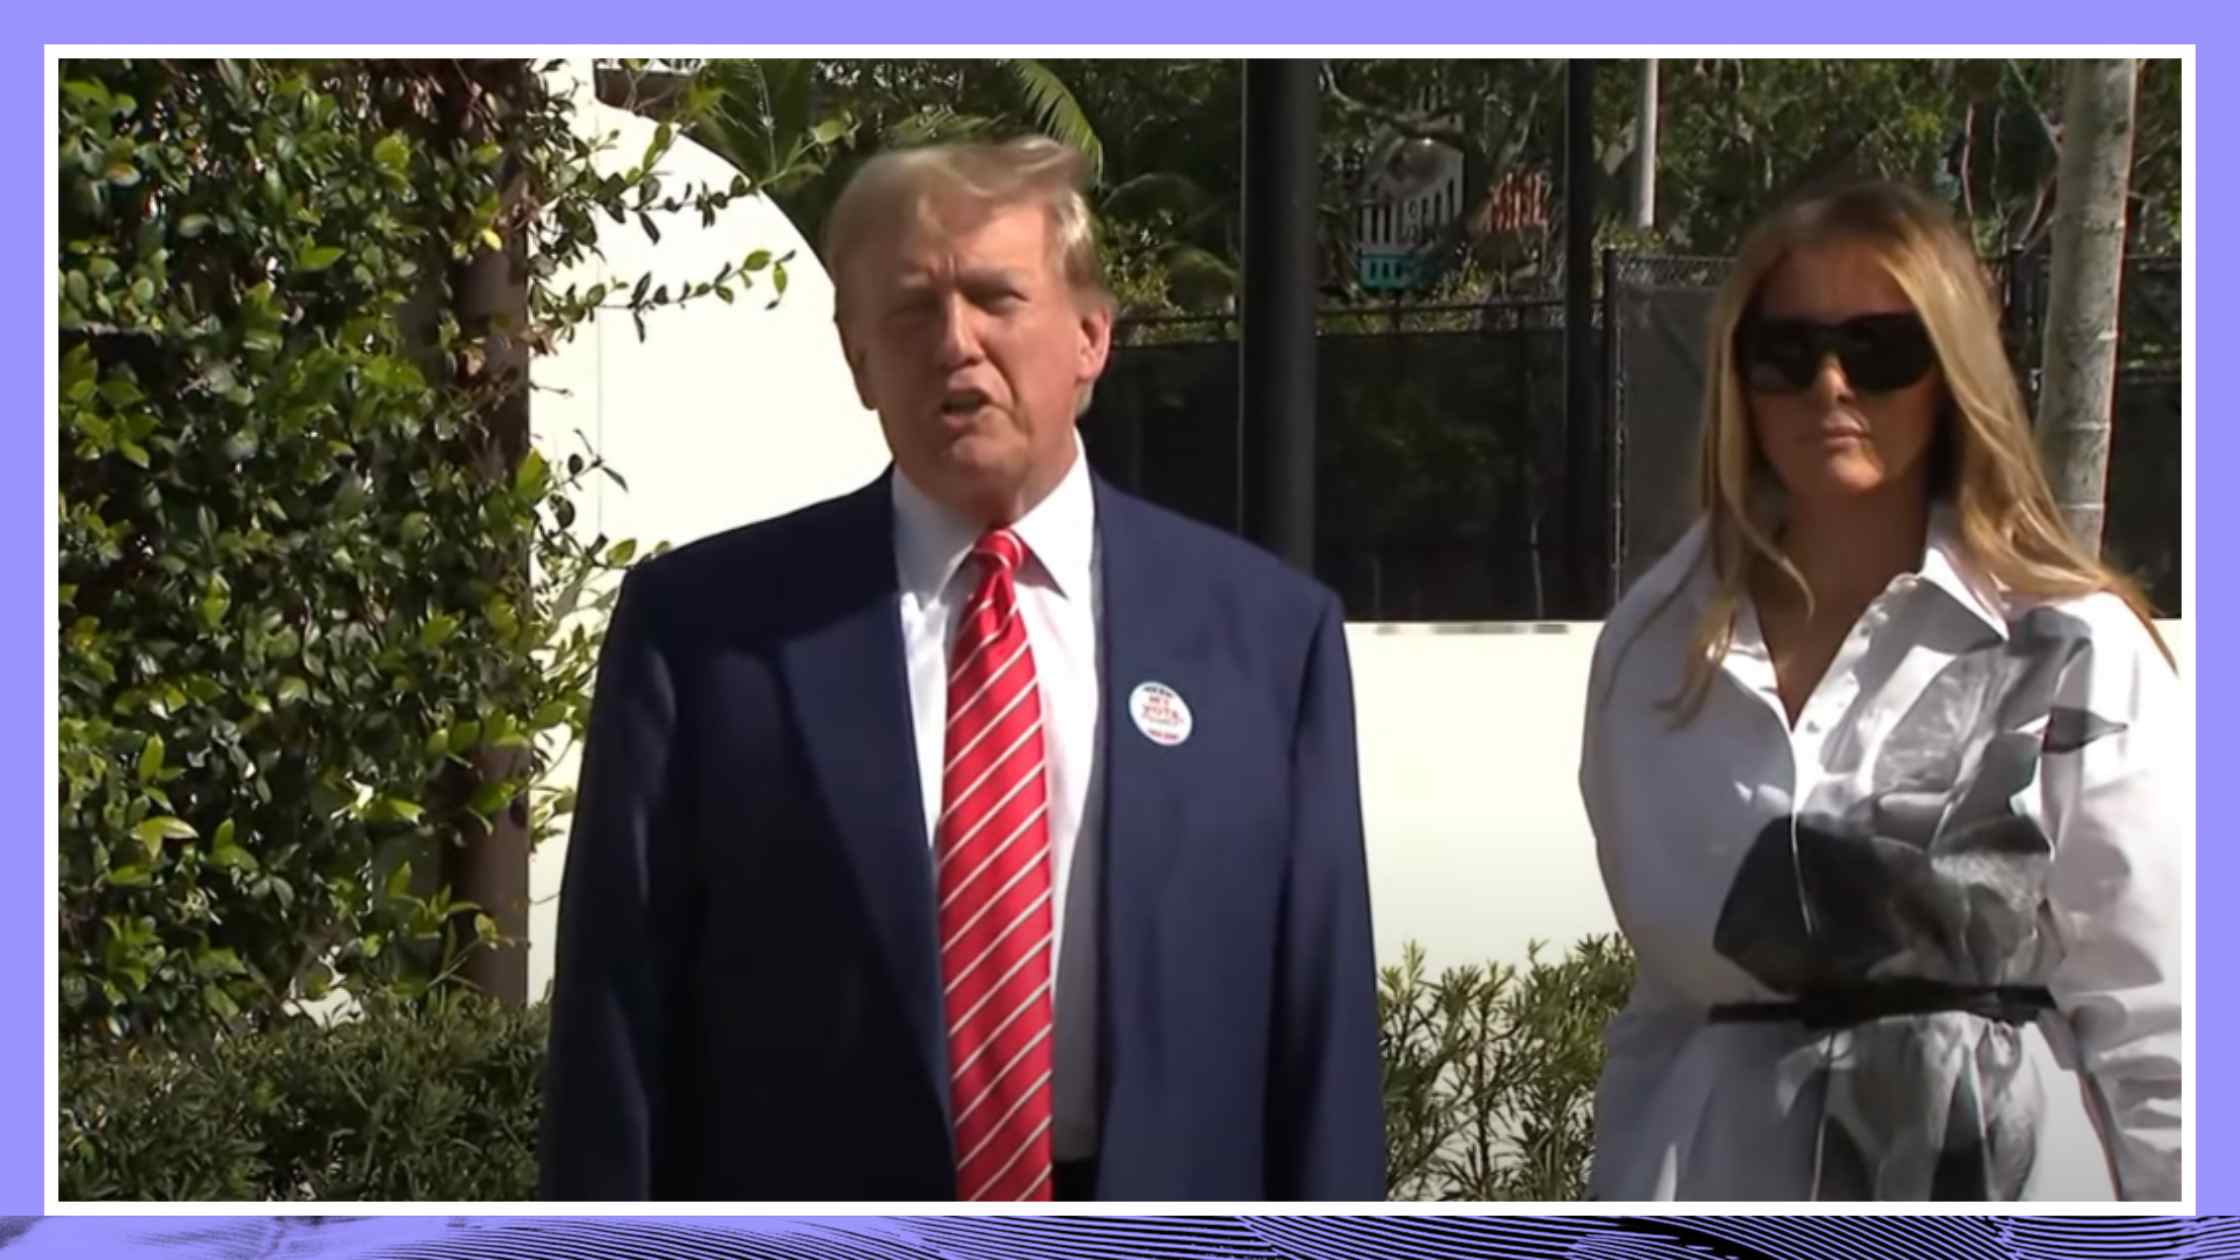 Trump speaks to press after voting in Florida Primary